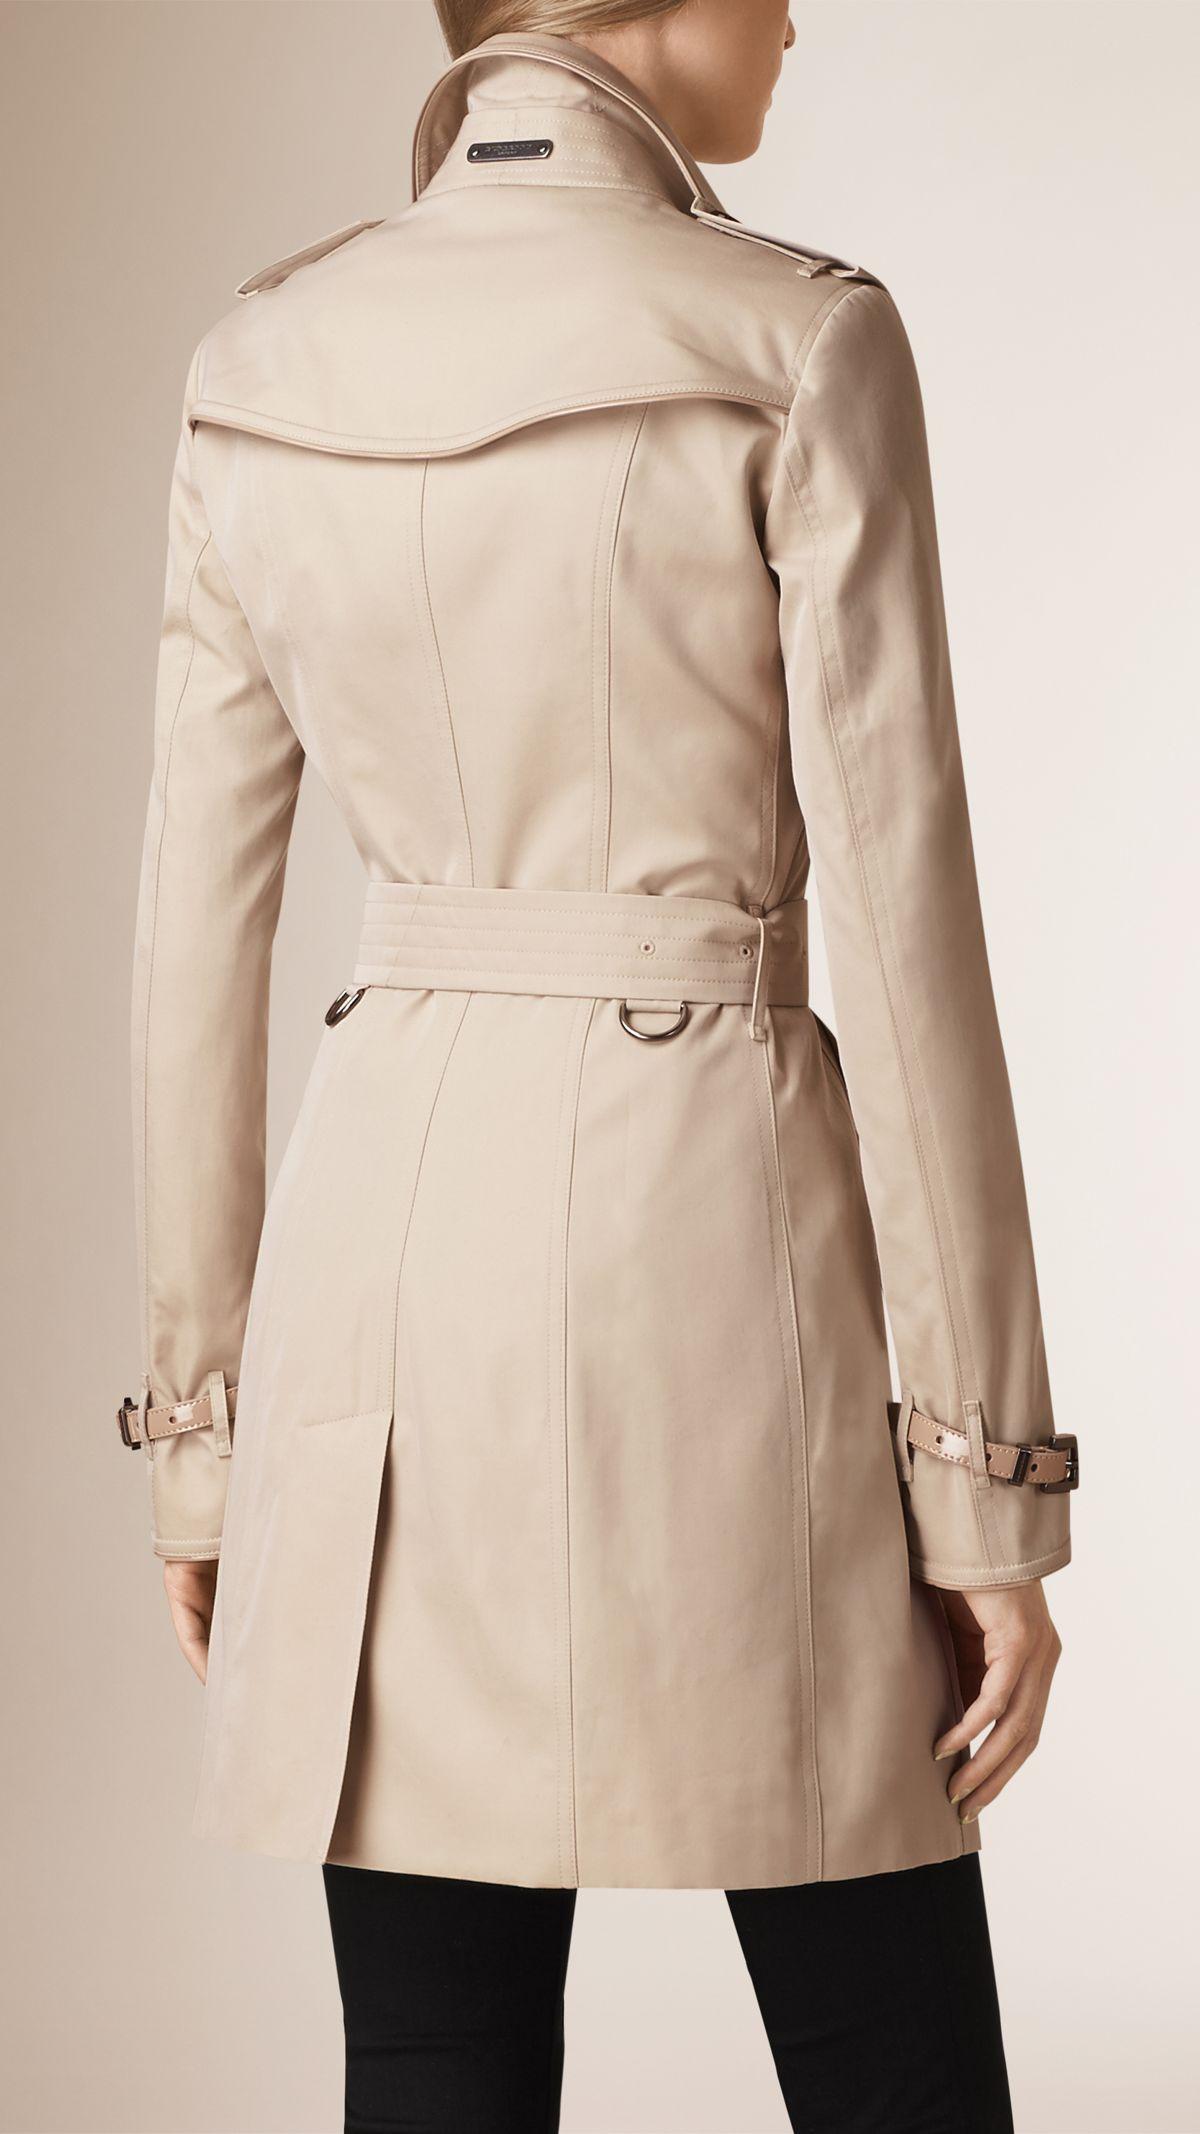 Burberry Cotton-Gabardine Trench Coat in Stone (Natural) - Lyst